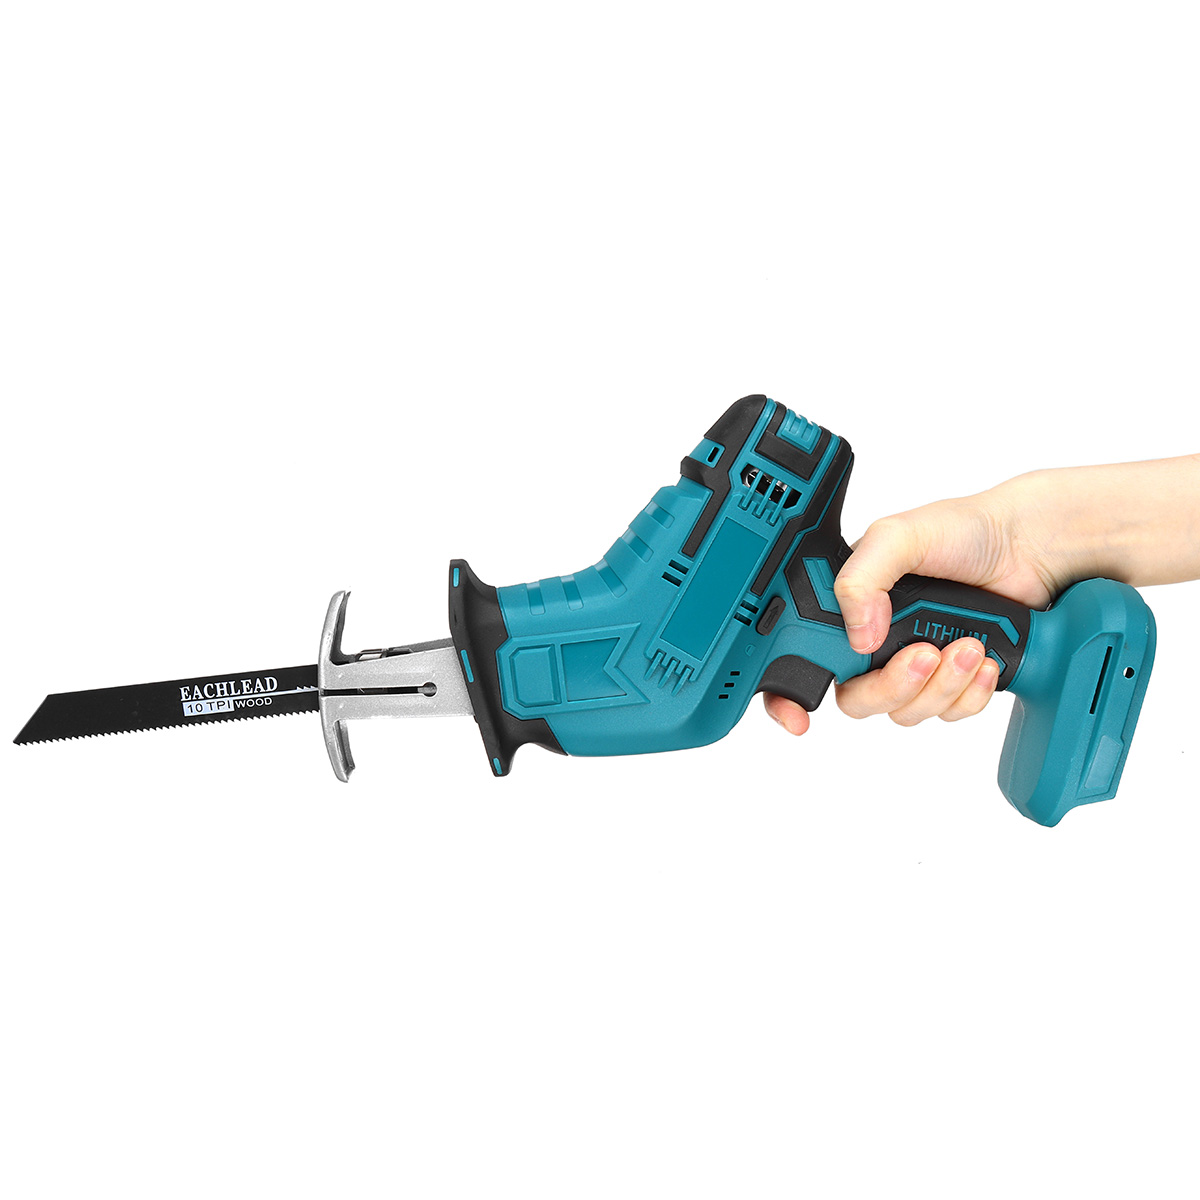 18V-Cordless-Electric-Reciprocating-Saw-Variable-Speed-Metal-Wood-Cutting-Tool-Saber-Saw-W-12X-Blade-1723641-7